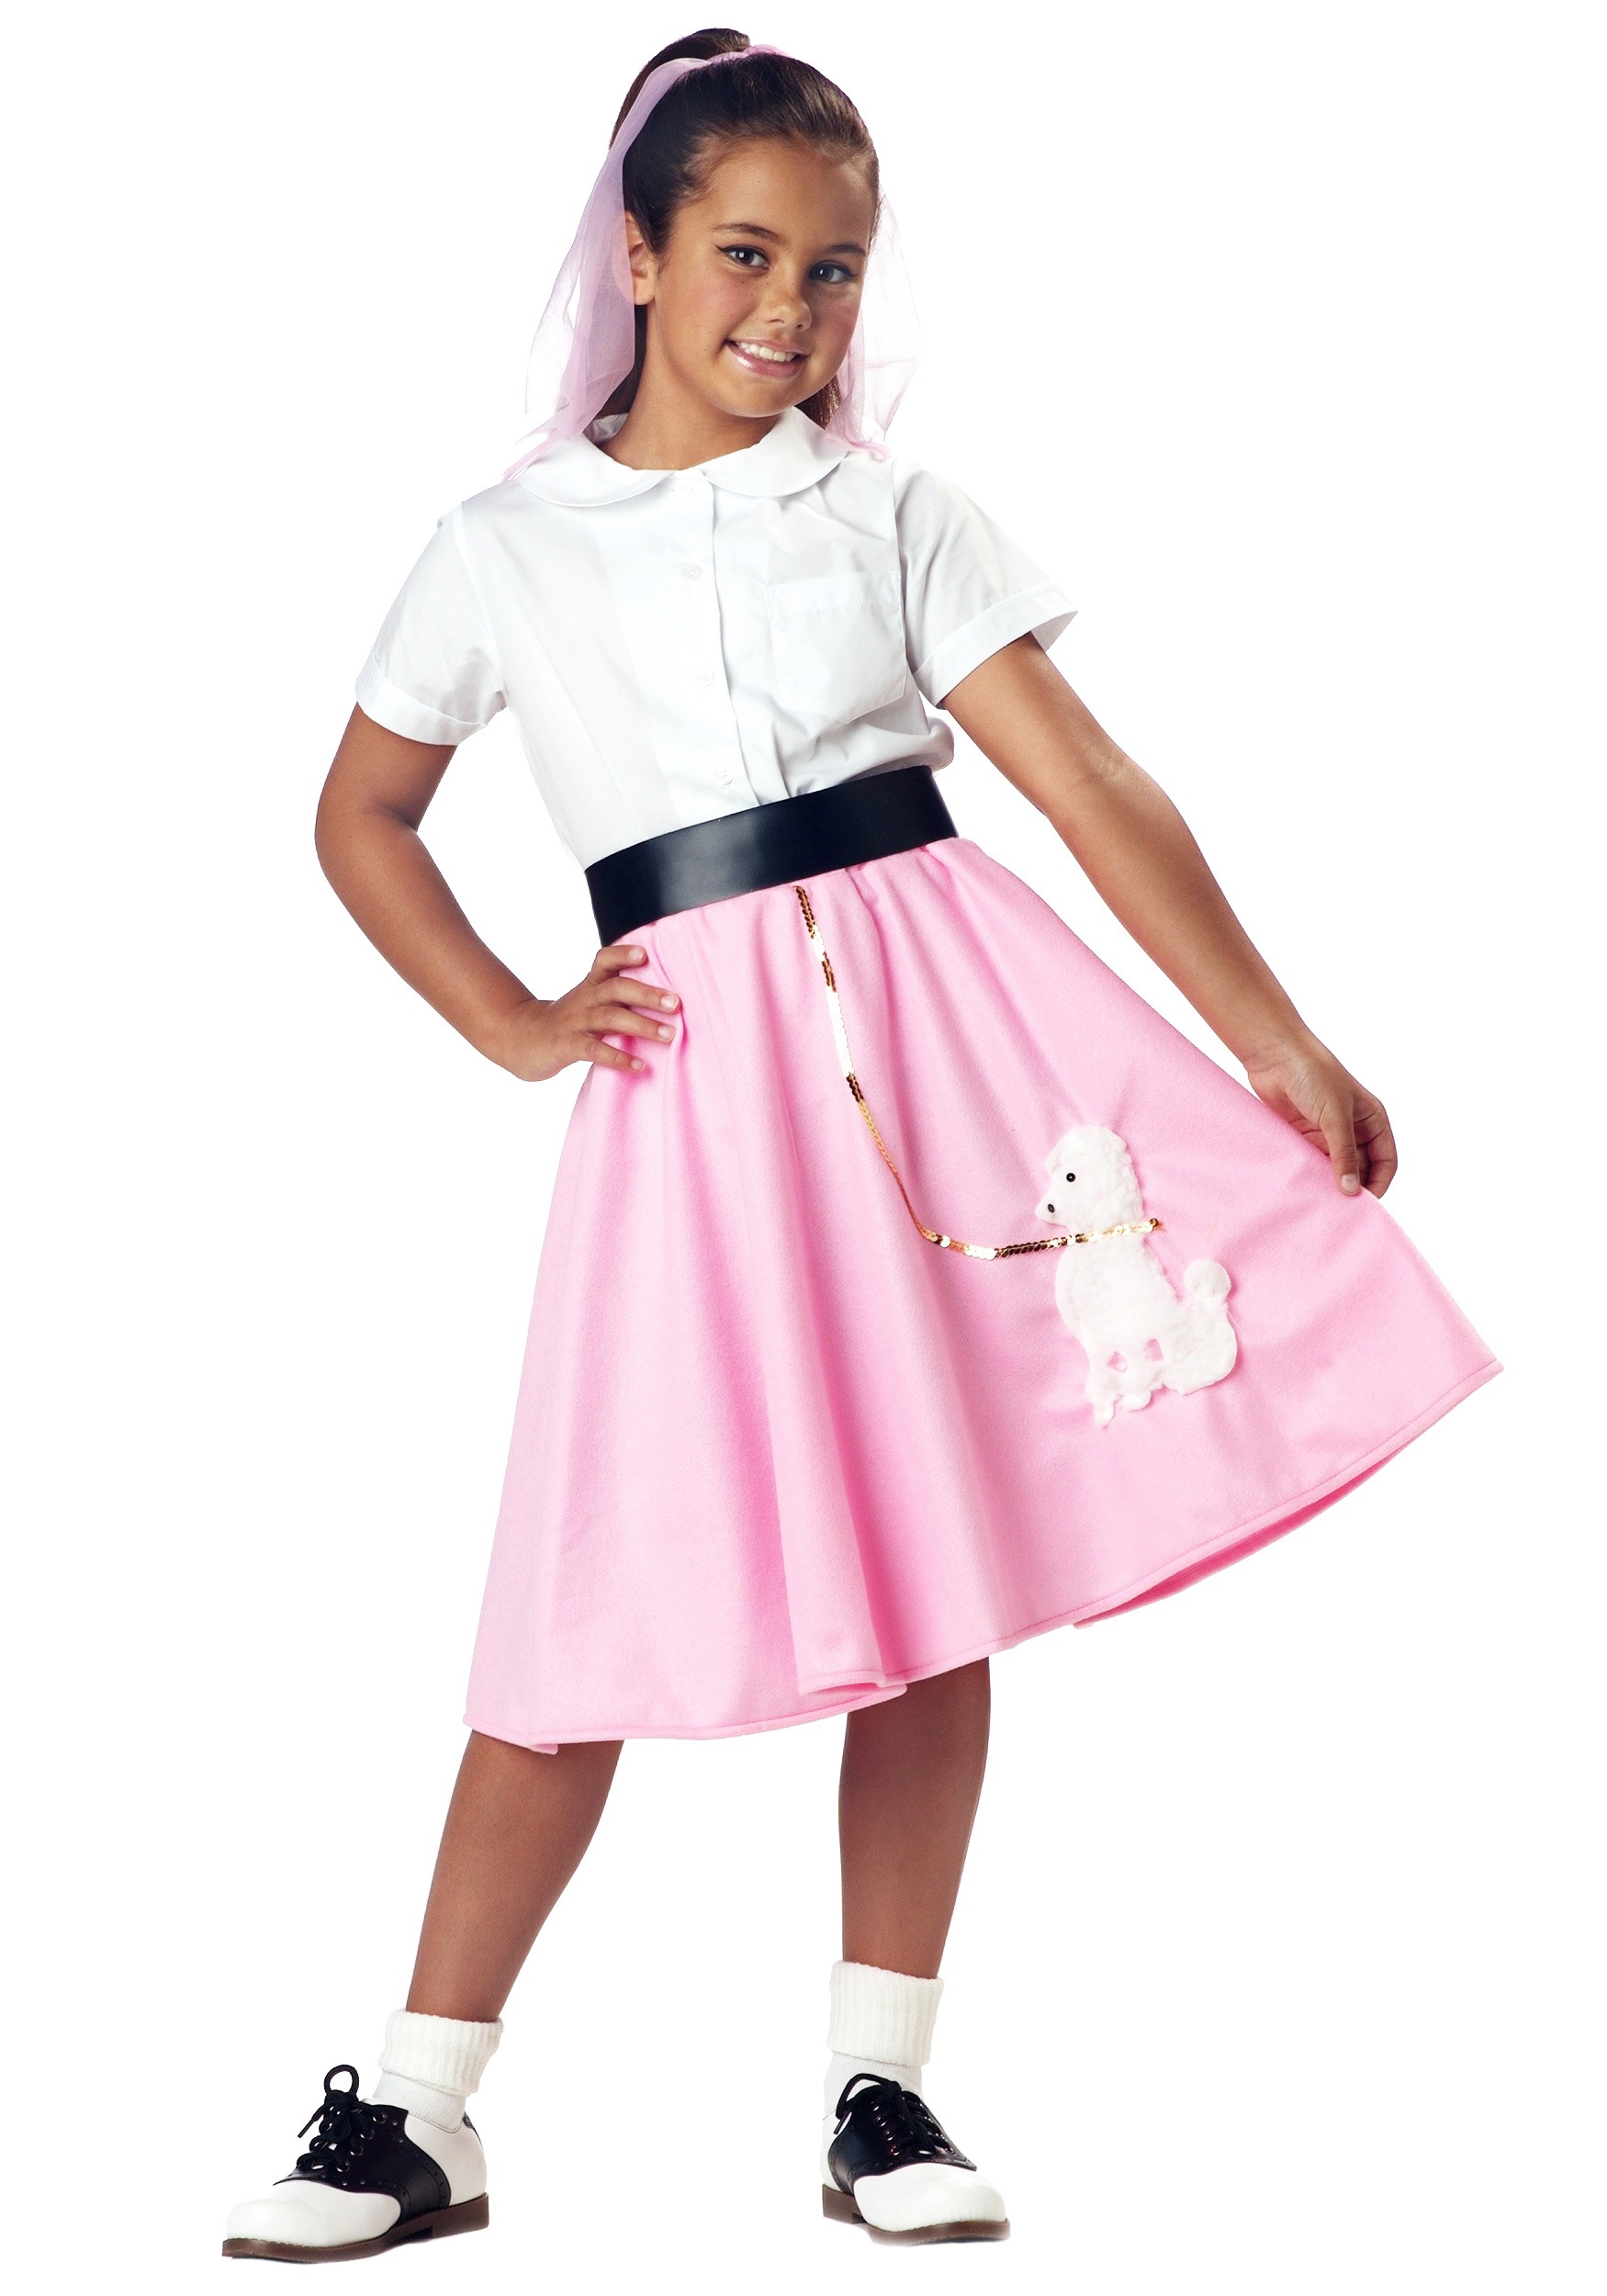 Photos - Fancy Dress California Costume Collection Pink Poodle Skirt Costume for Kids Pink/ 